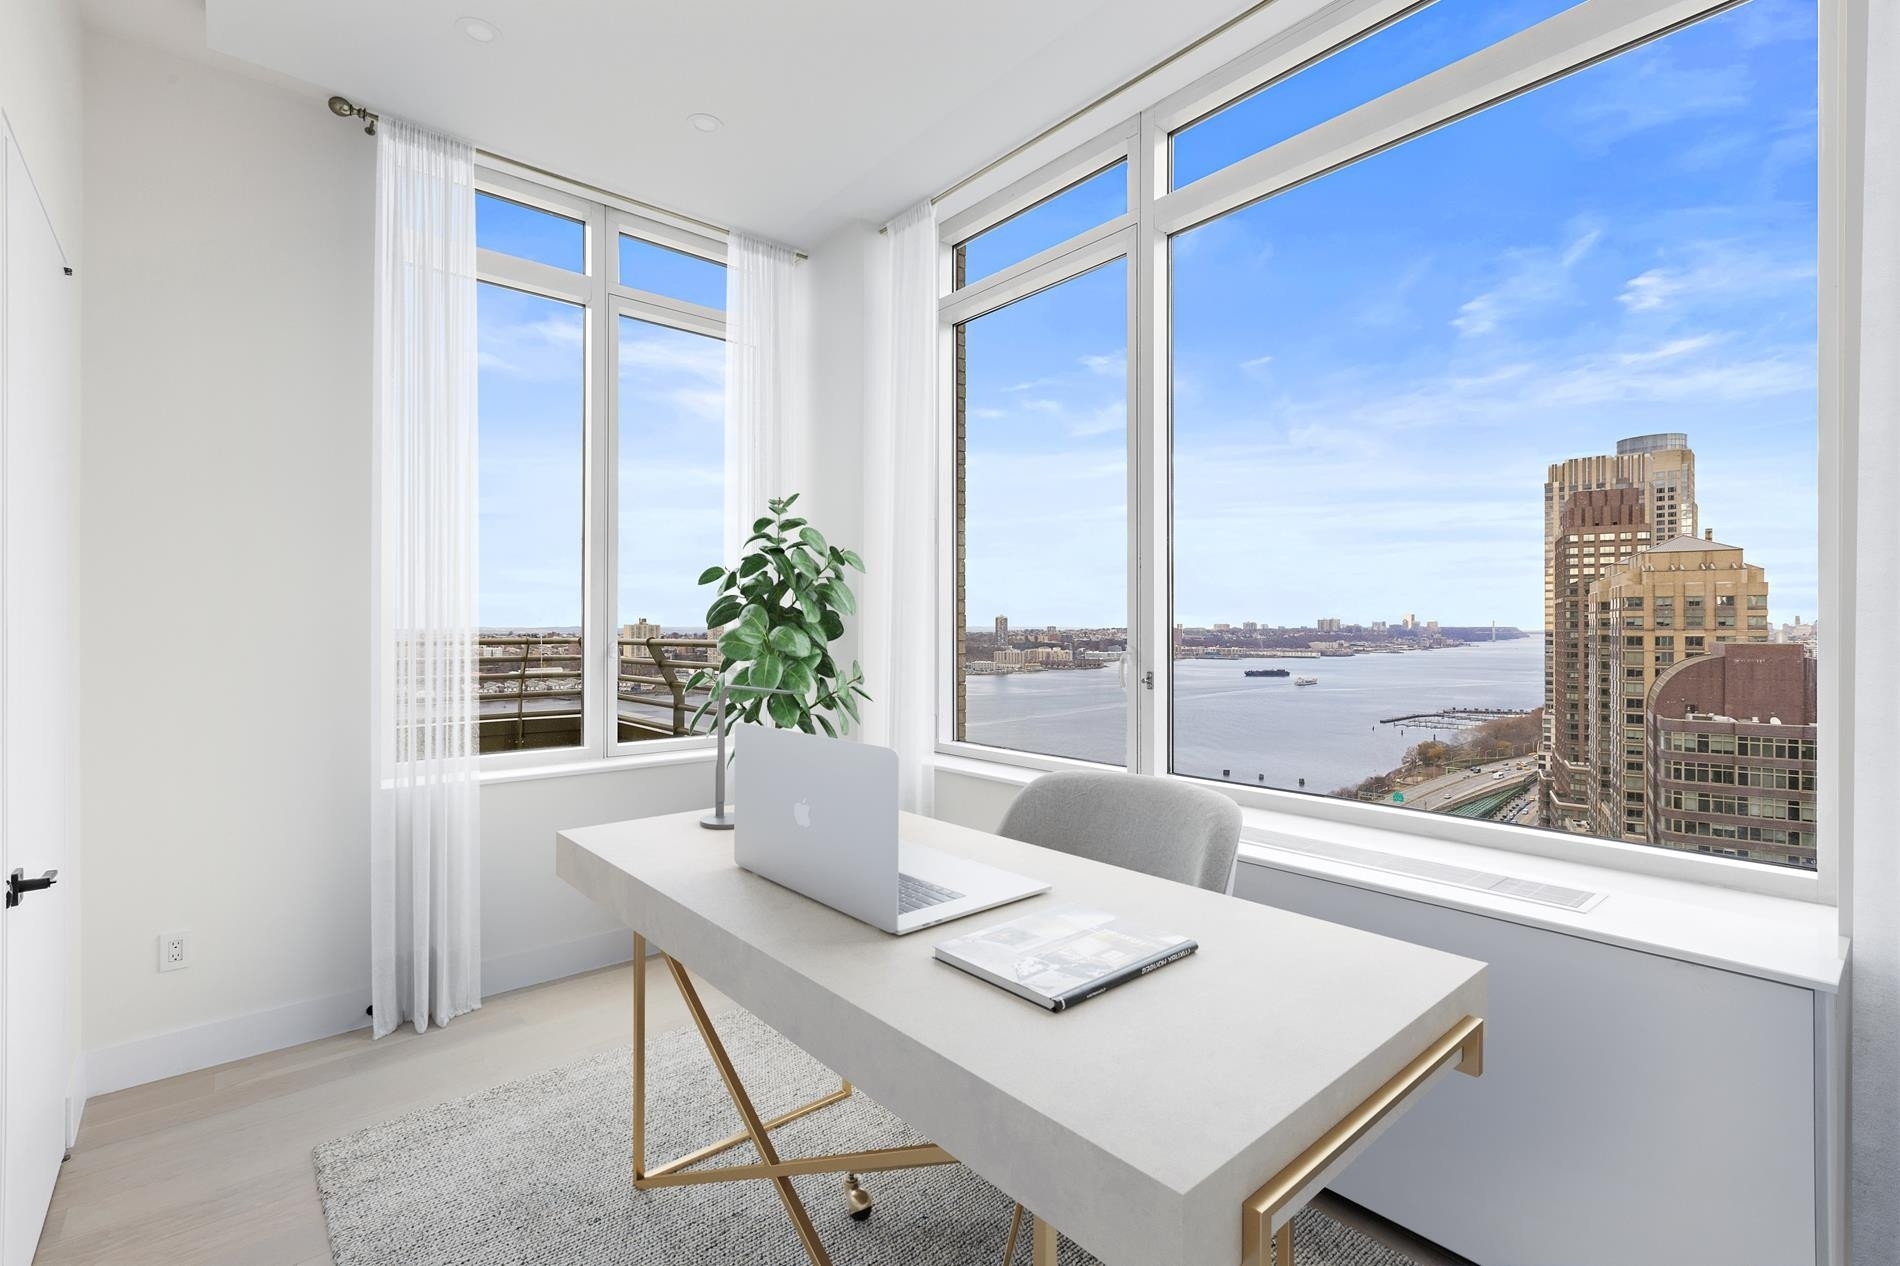 19. Condominiums for Sale at The Avery, 100 RIVERSIDE BLVD, PHA Lincoln Square, New York, New York 10069